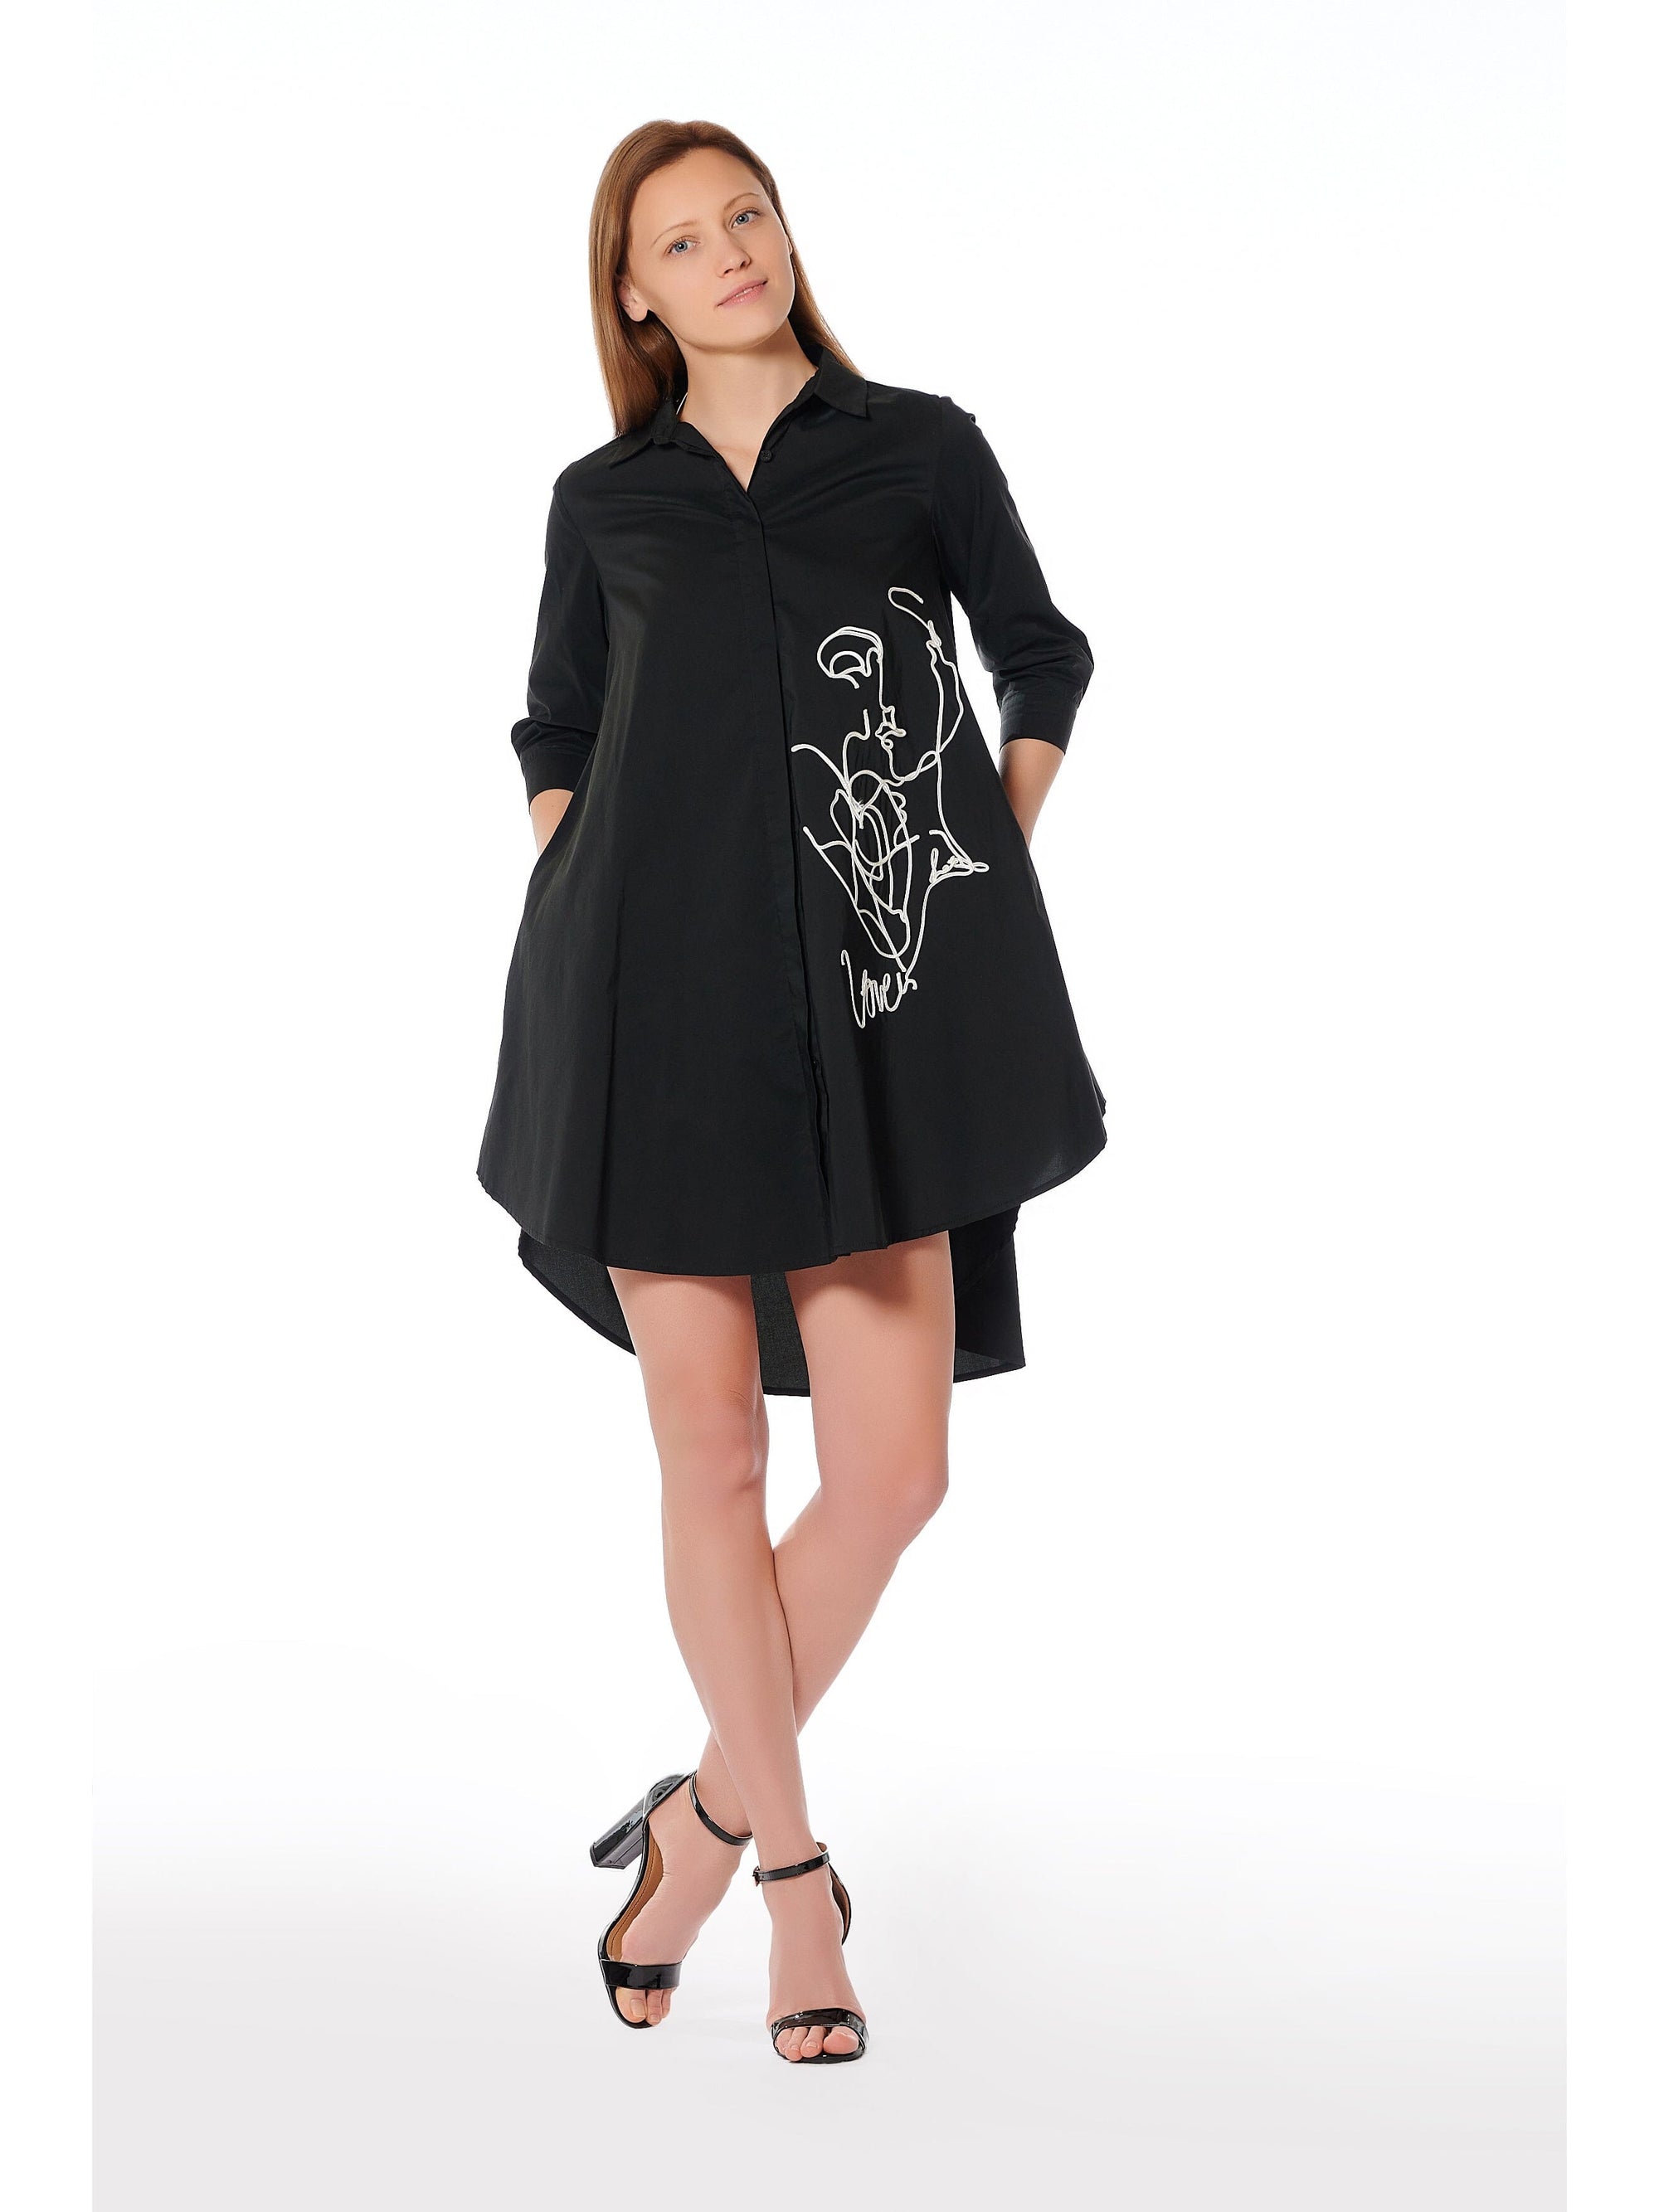 Modern Line Art Face Embroidered Collared Tunic TOP Gracia Fashion BLACK S 